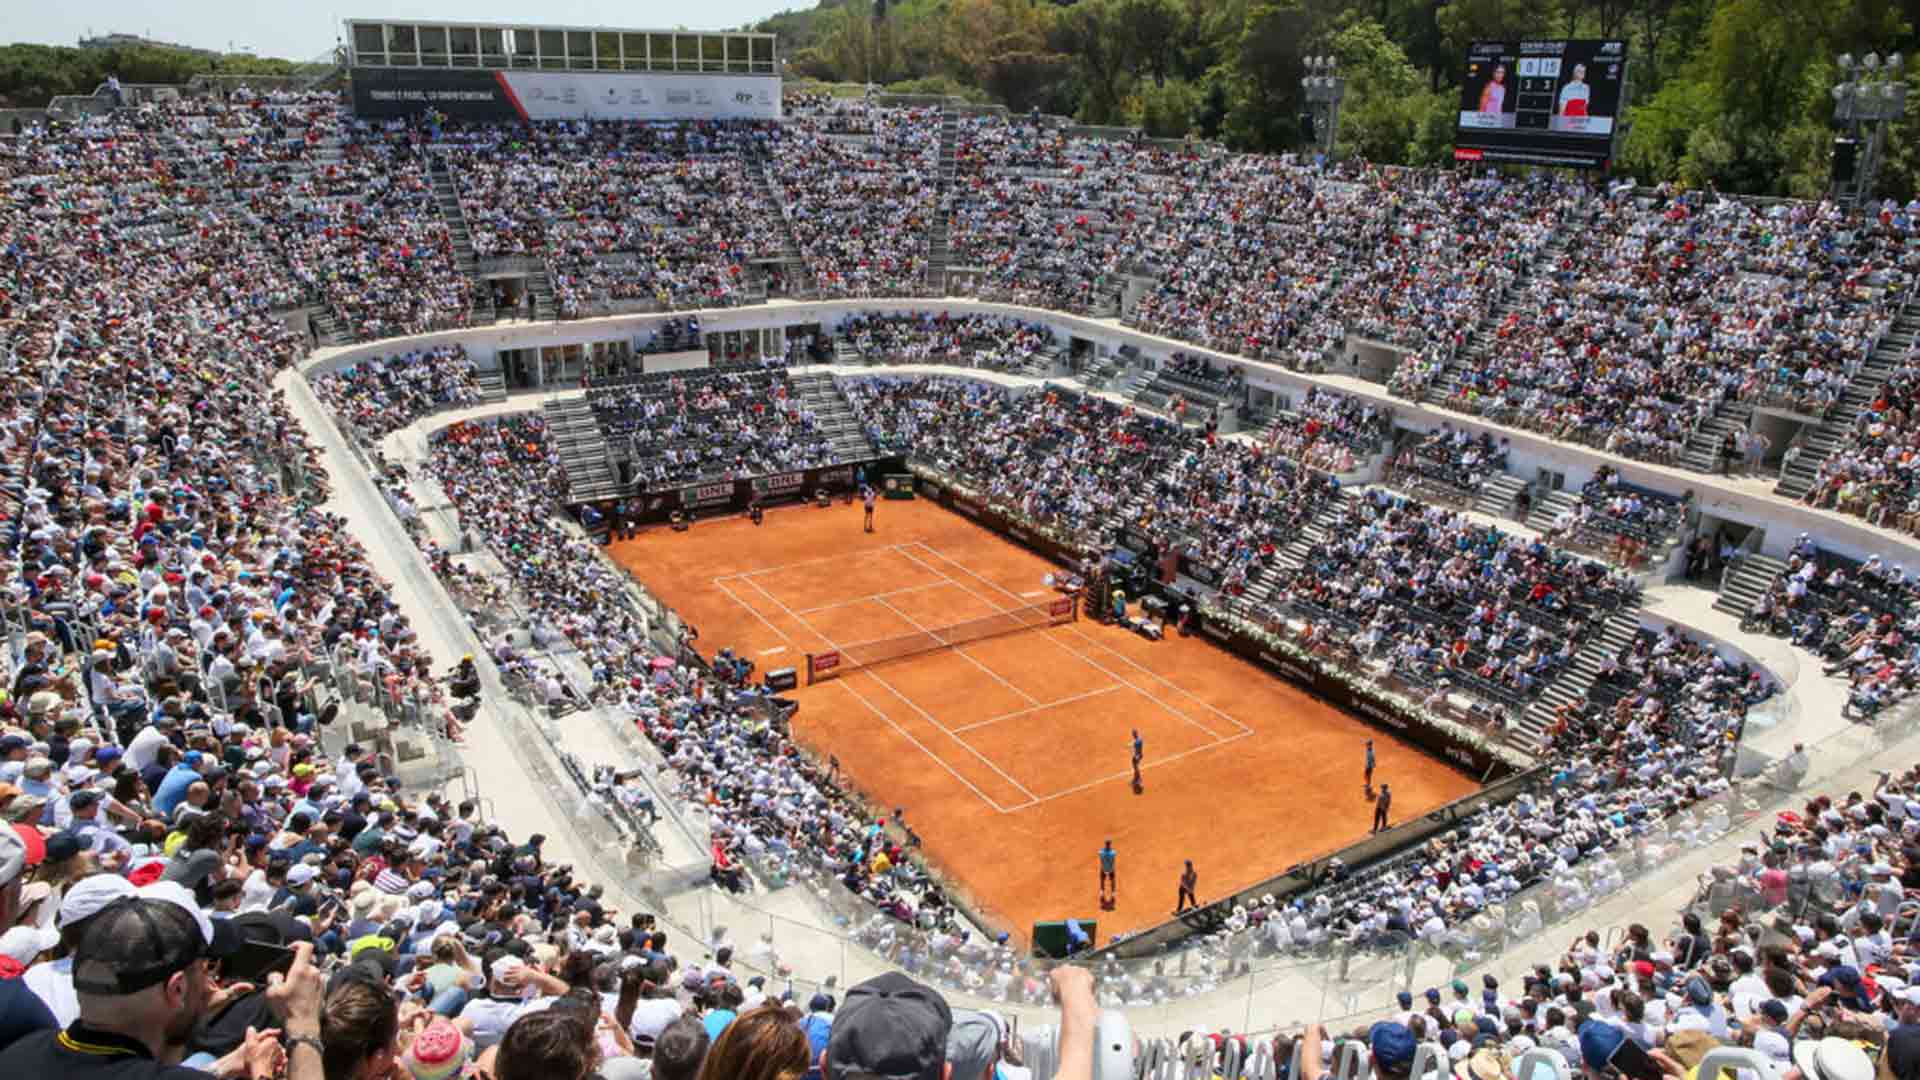 2021 Italian Open Men's and Women's Draw Preview and Analysis